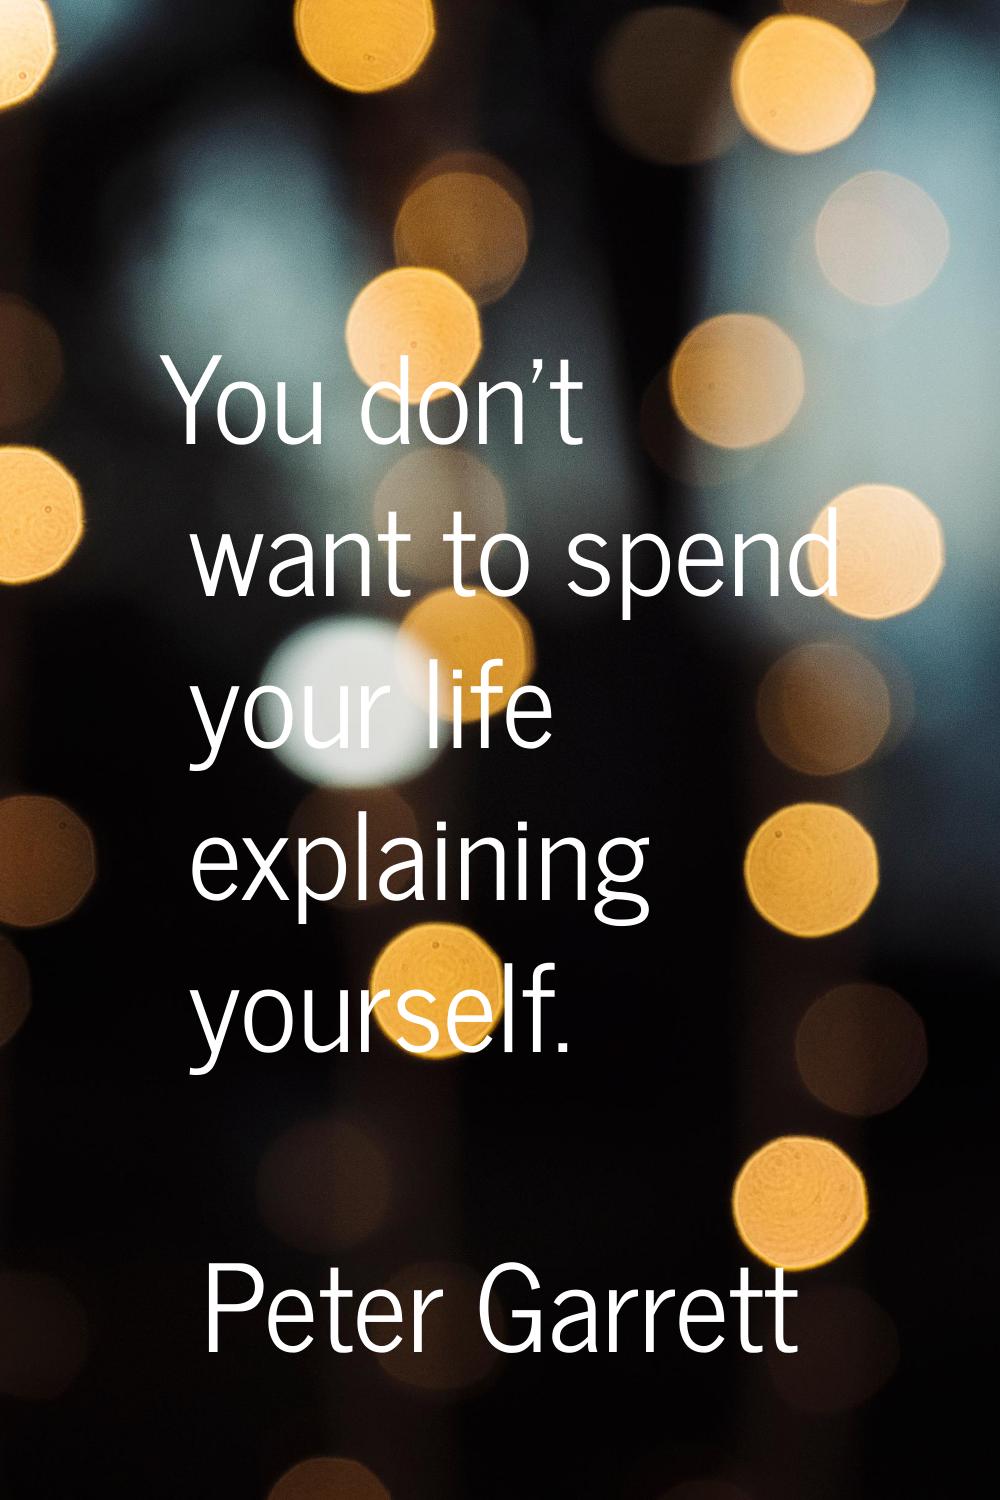 You don't want to spend your life explaining yourself.